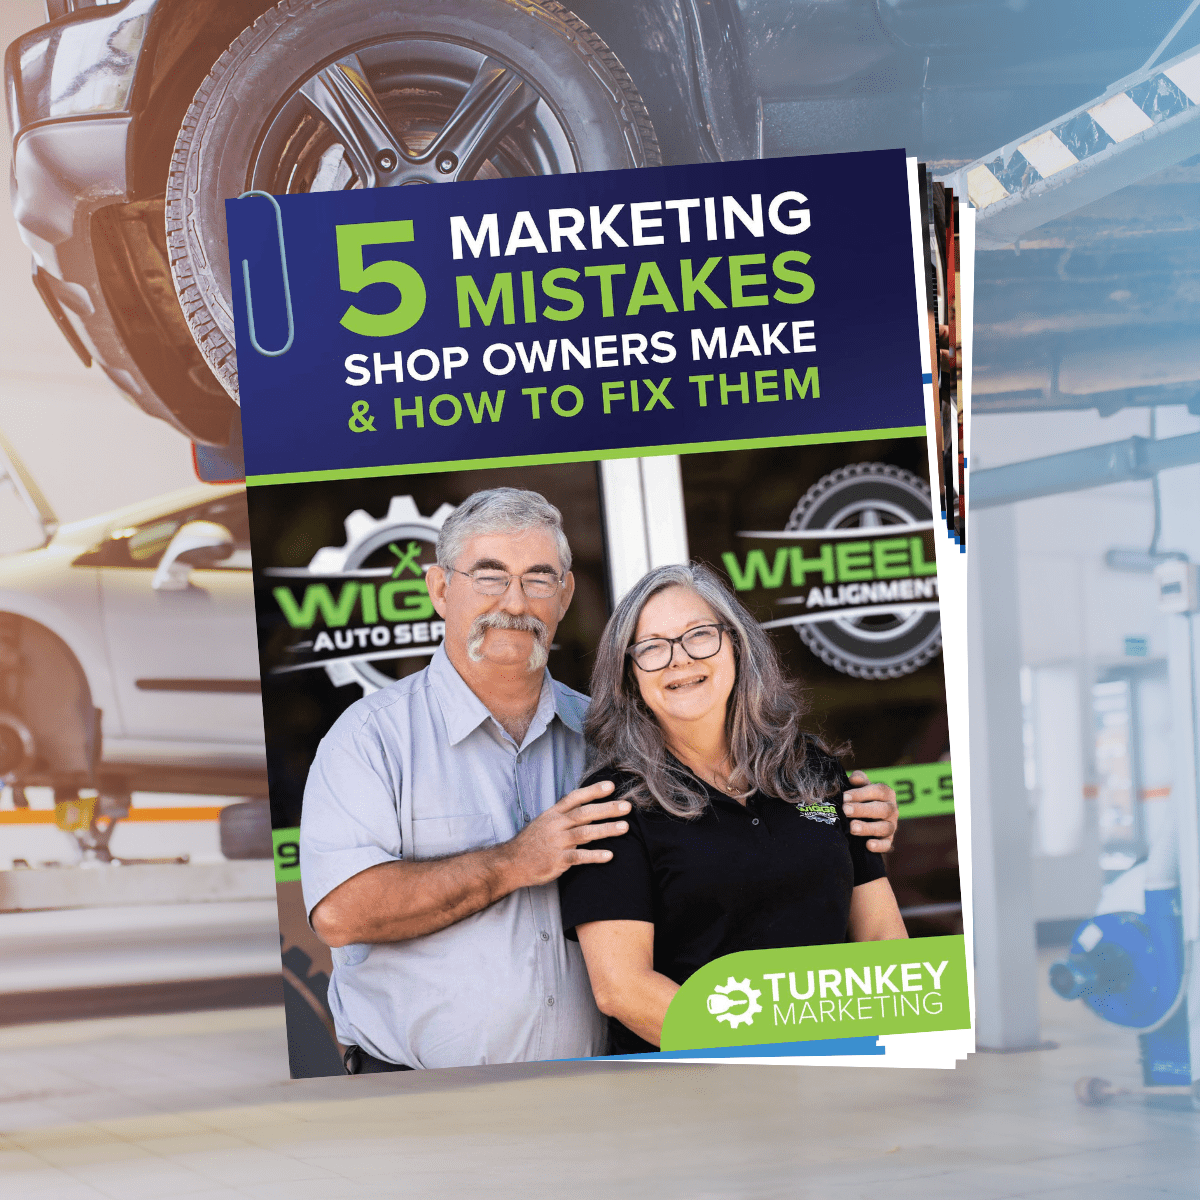 Turnkey Marketing lead generator graphic - Turnkey Marketing helps auto repair shop owners fix their marketing mistakes